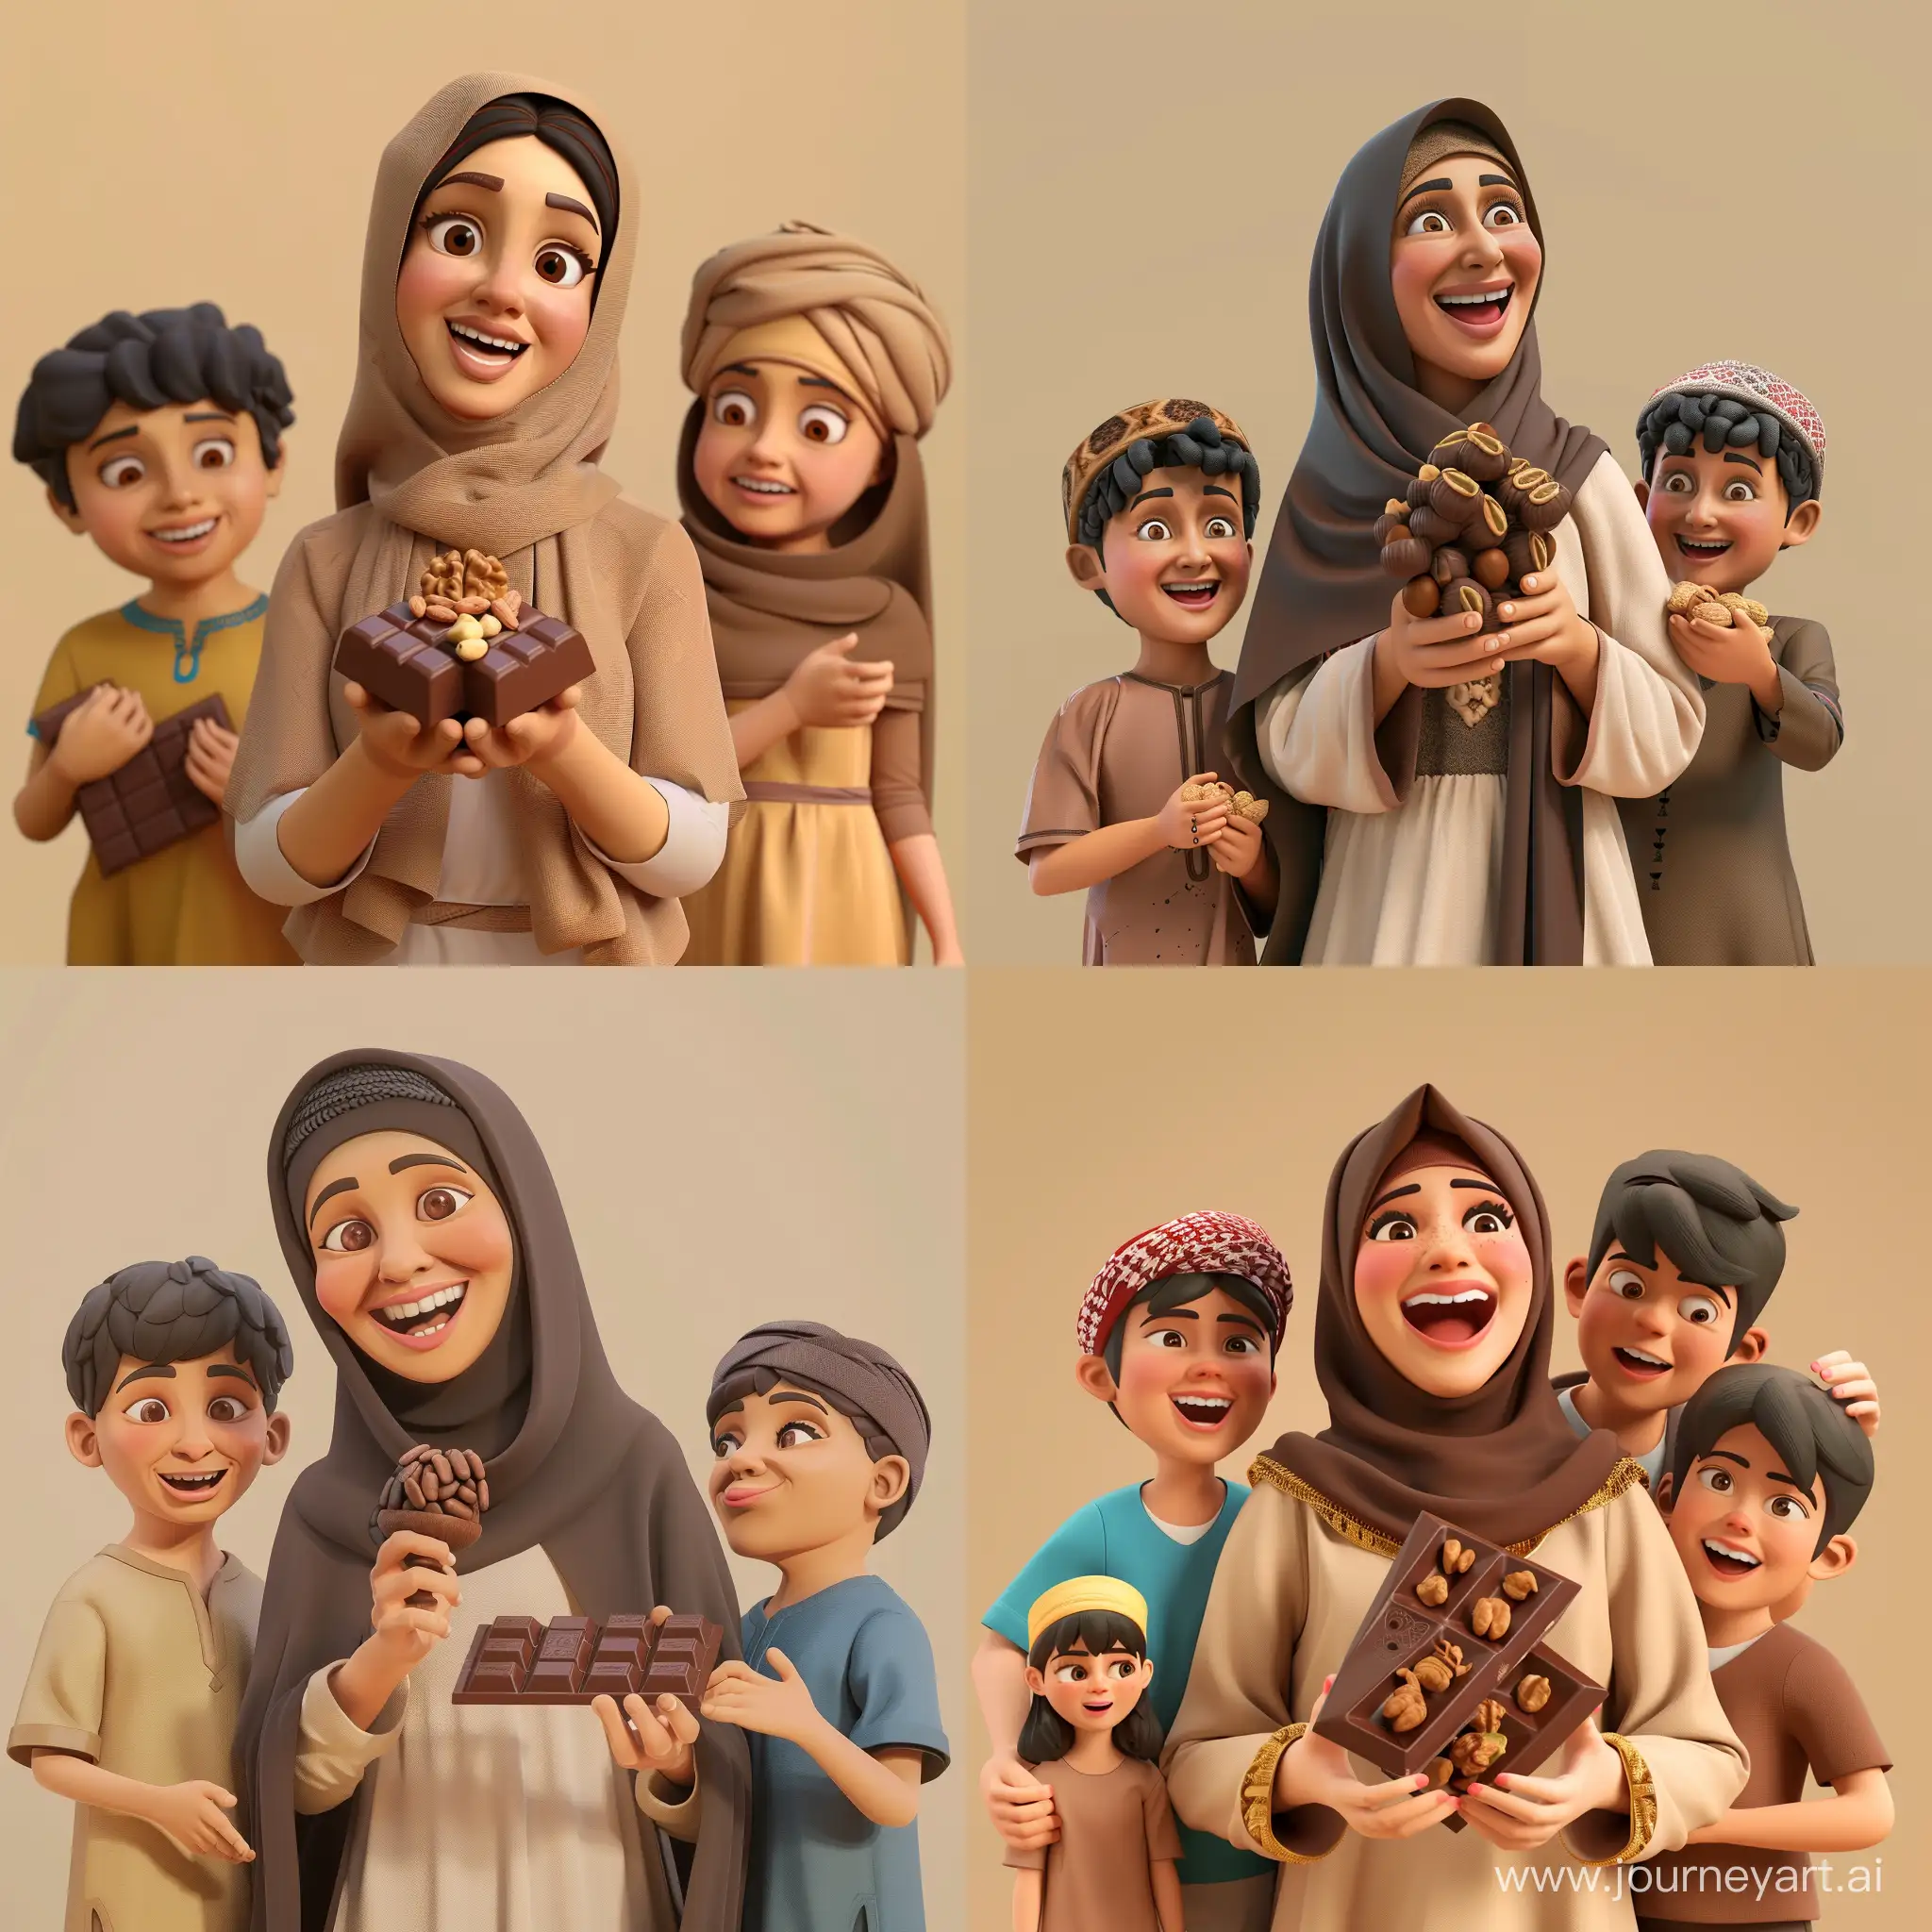 A Yemeni mother is holding chocolate candy with nuts and she is very happy, with two boys and a girl behind her, the background is beige, 3D style.